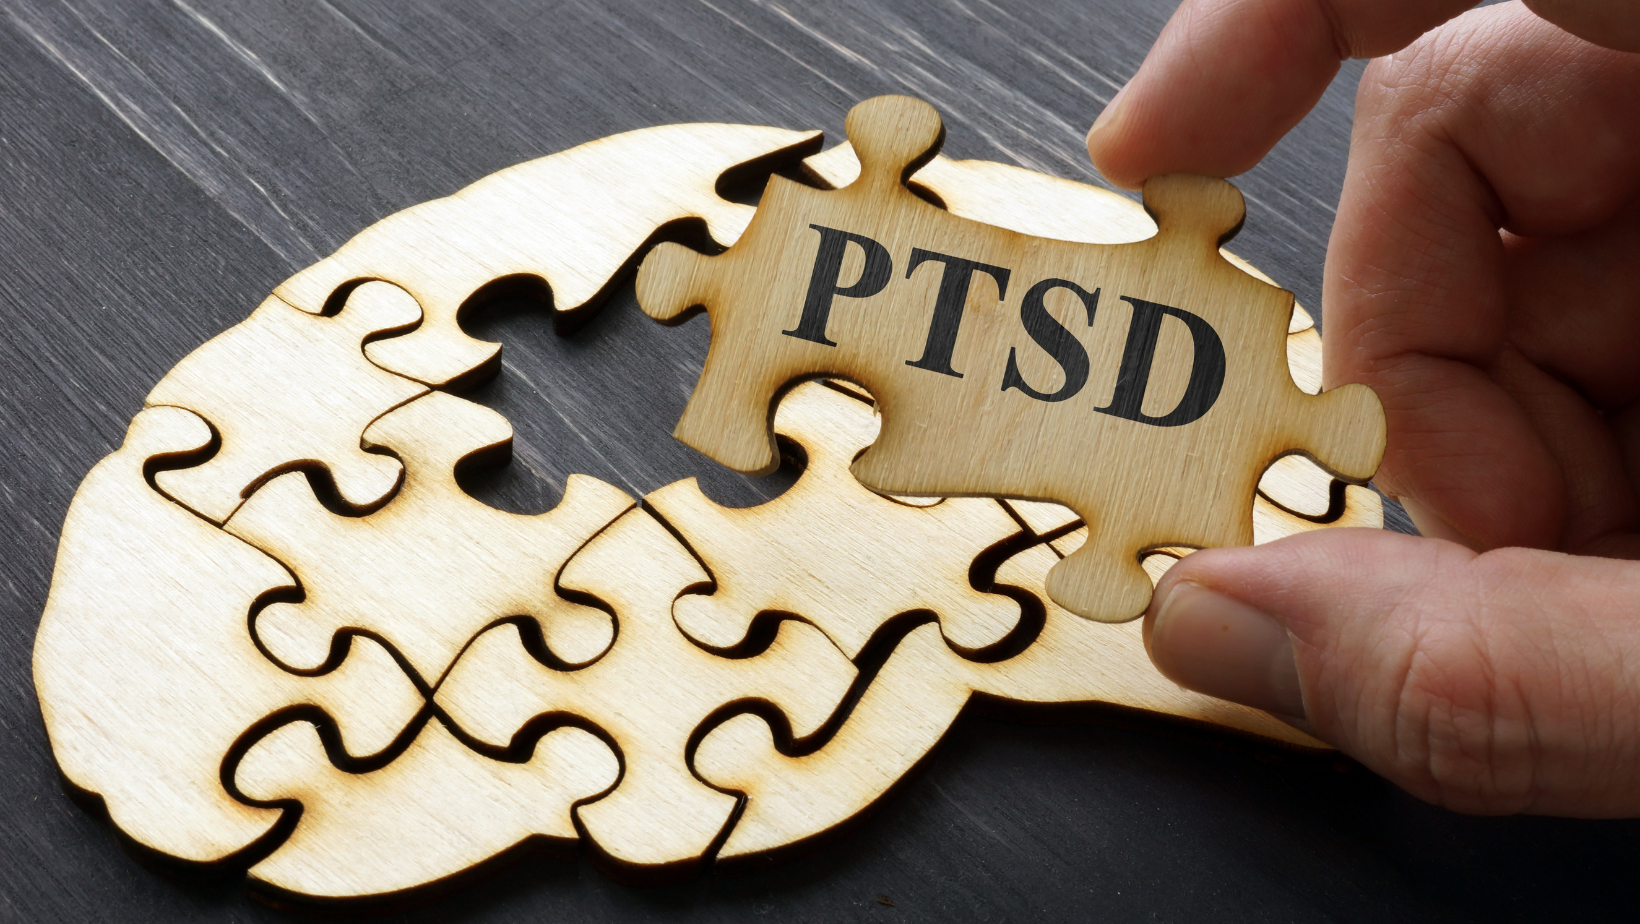 Mental Health and PTSD Signs and Symptoms